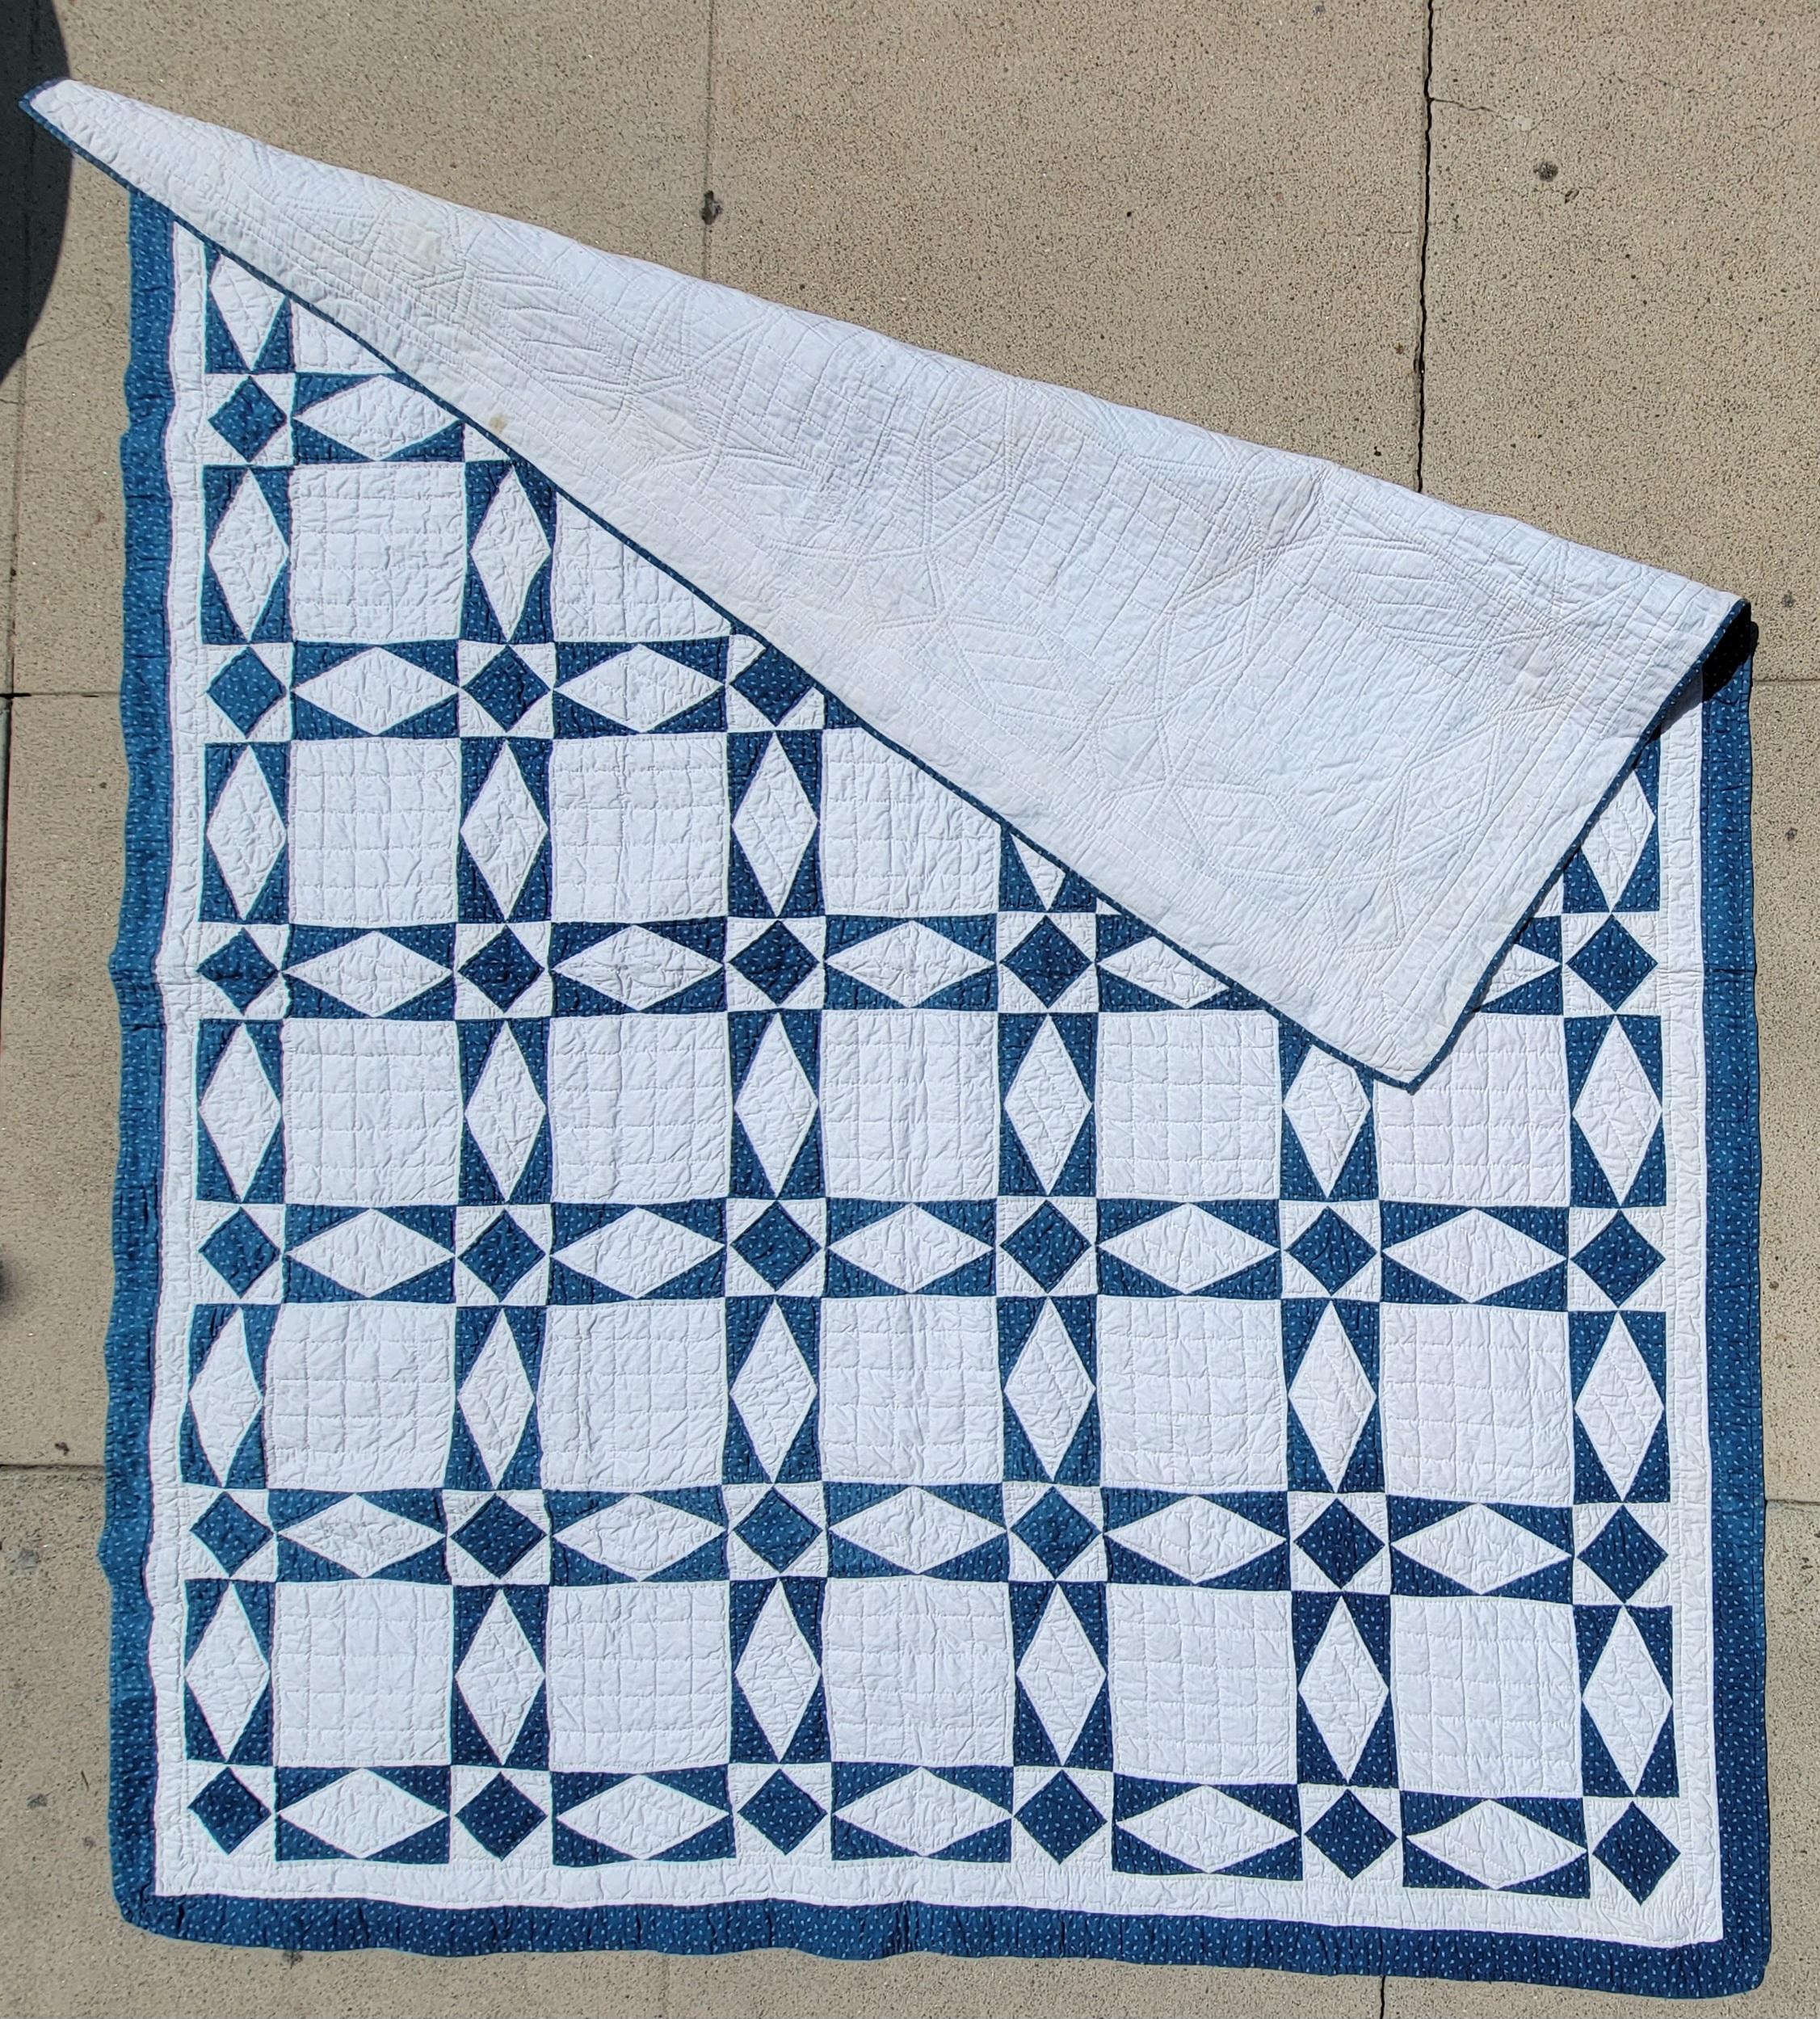 19th century Blue & white touching stars quilt in fine clean condition.Fine quilting and piece work. Such an unusual pointed stars quilt and geometric border.